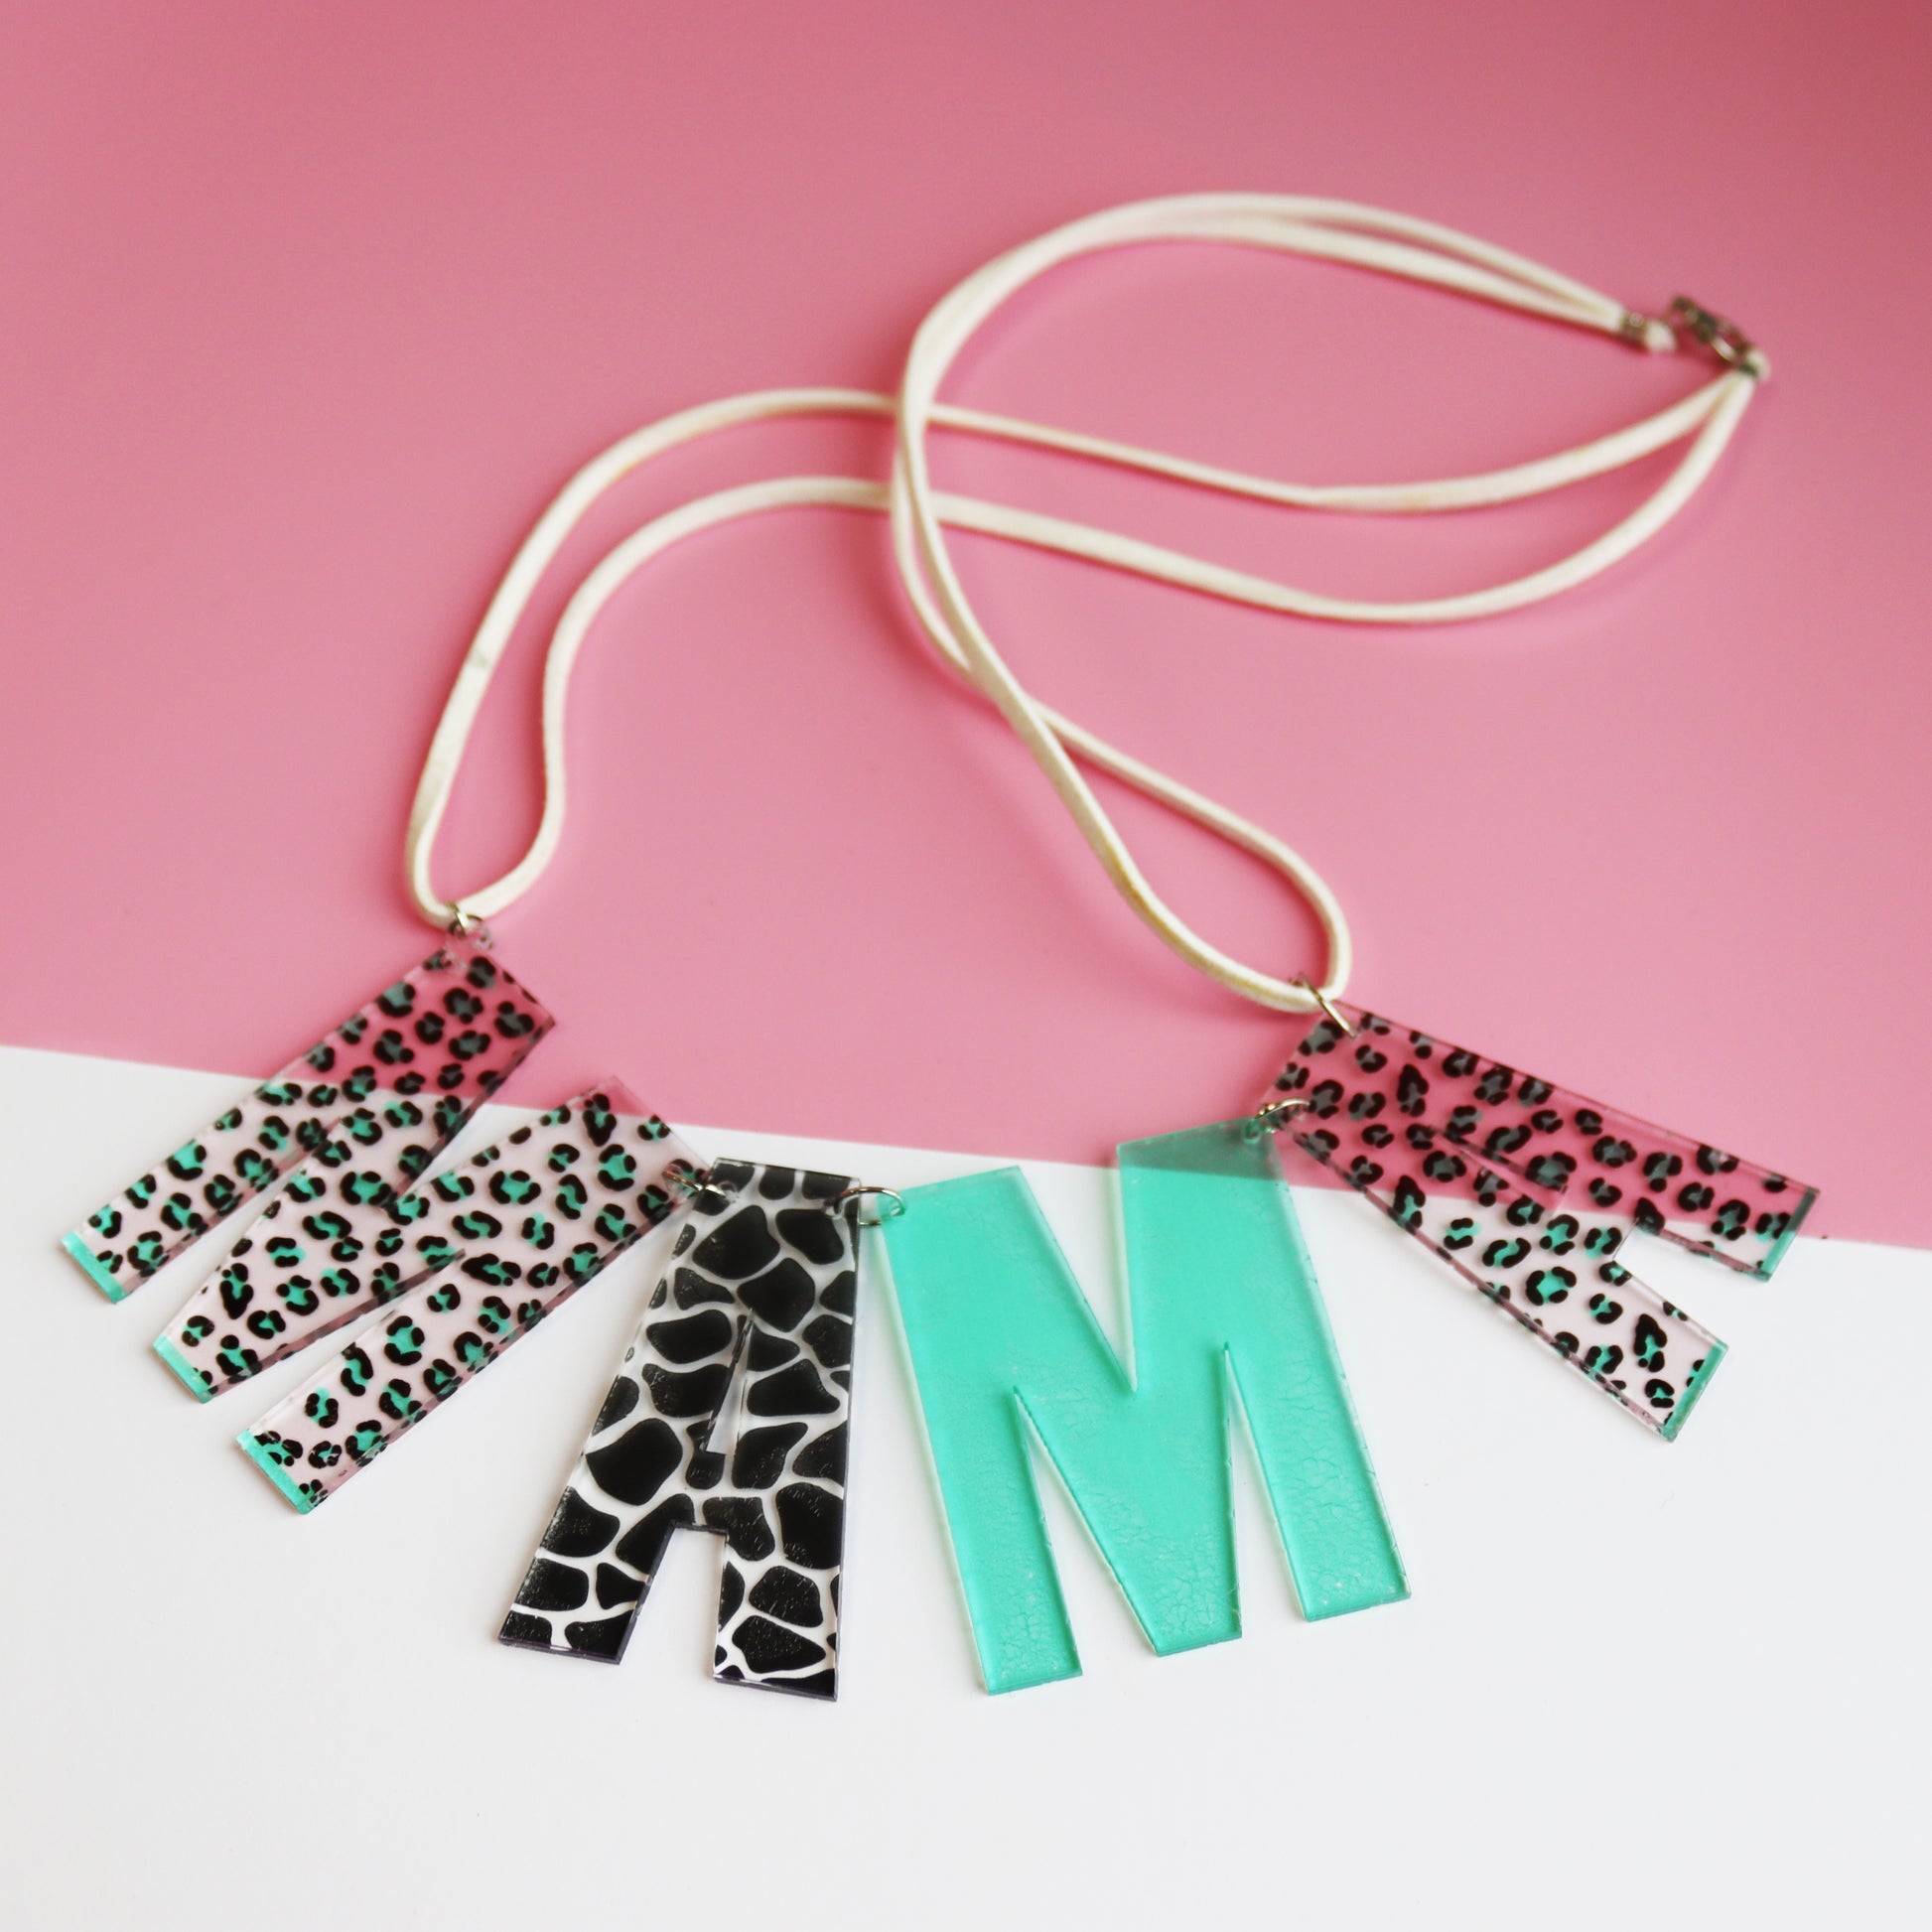 Mama leopard print acrylic necklace shown in white and pink background